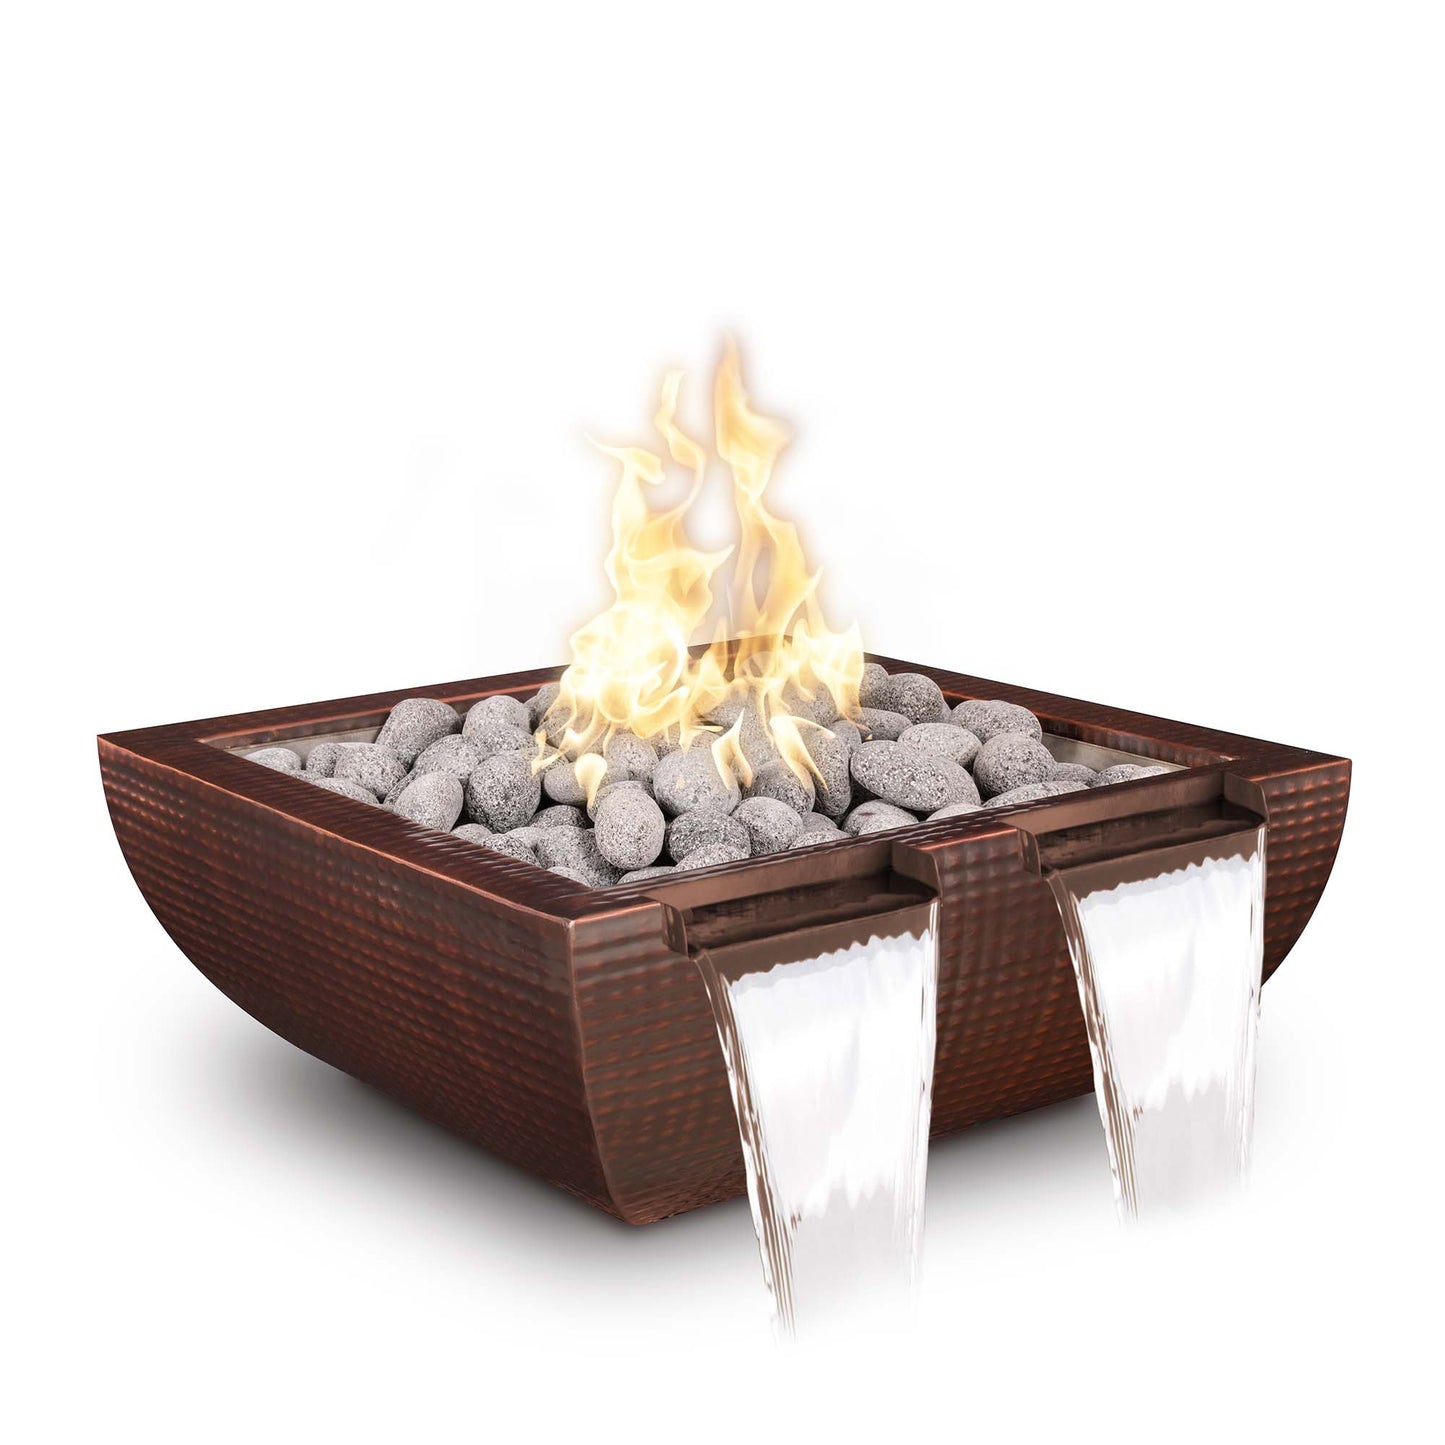 The Outdoor Plus Avalon Twin Spill 30" Java Powder Coated Metal Liquid Propane Fire & Water Bowl with Match Lit Ignition